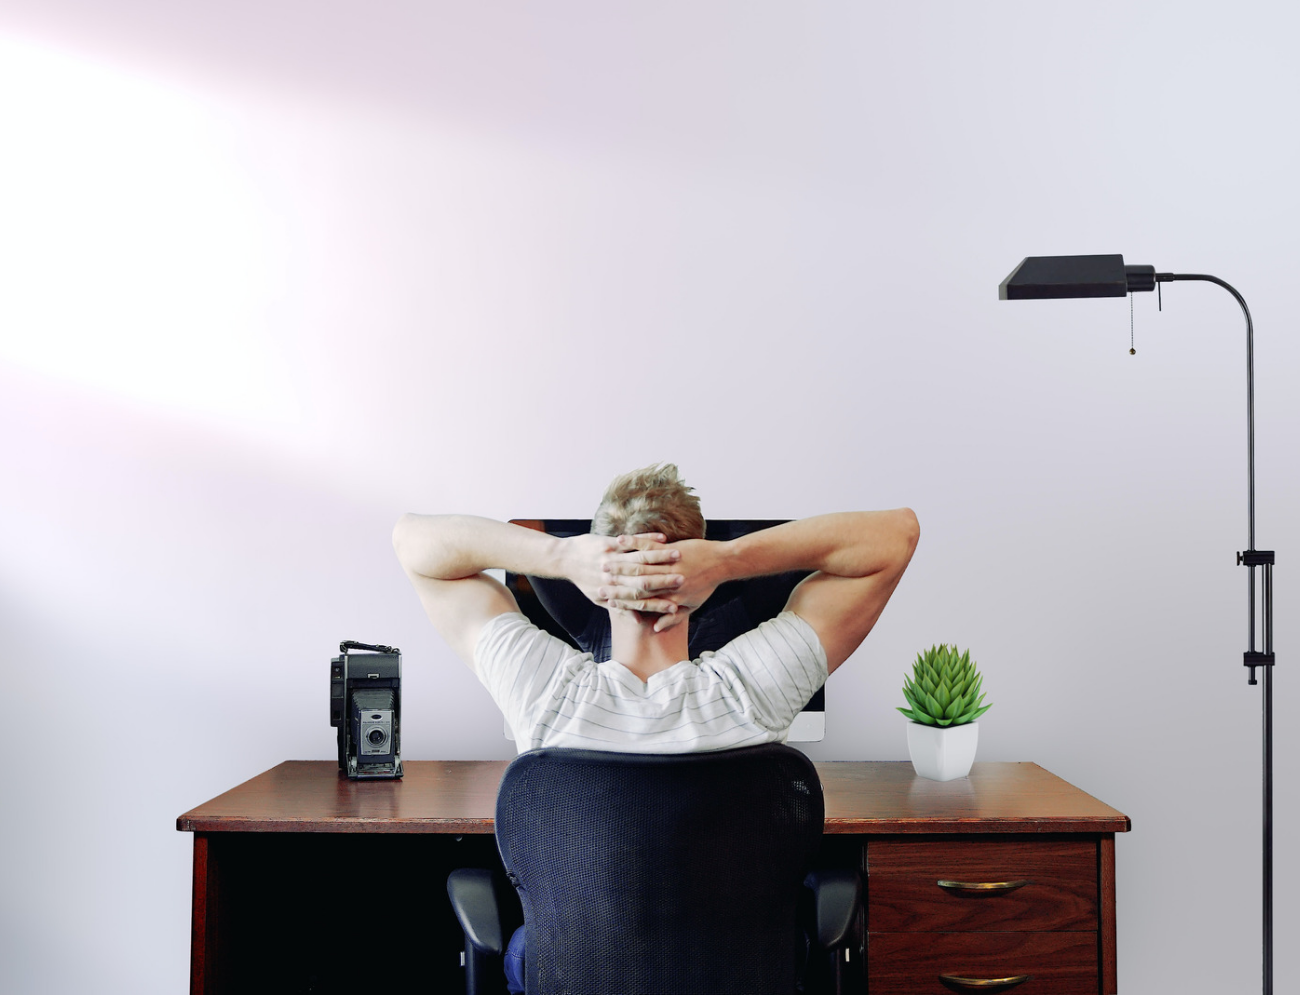 guy relaxing at a desk. view from behind